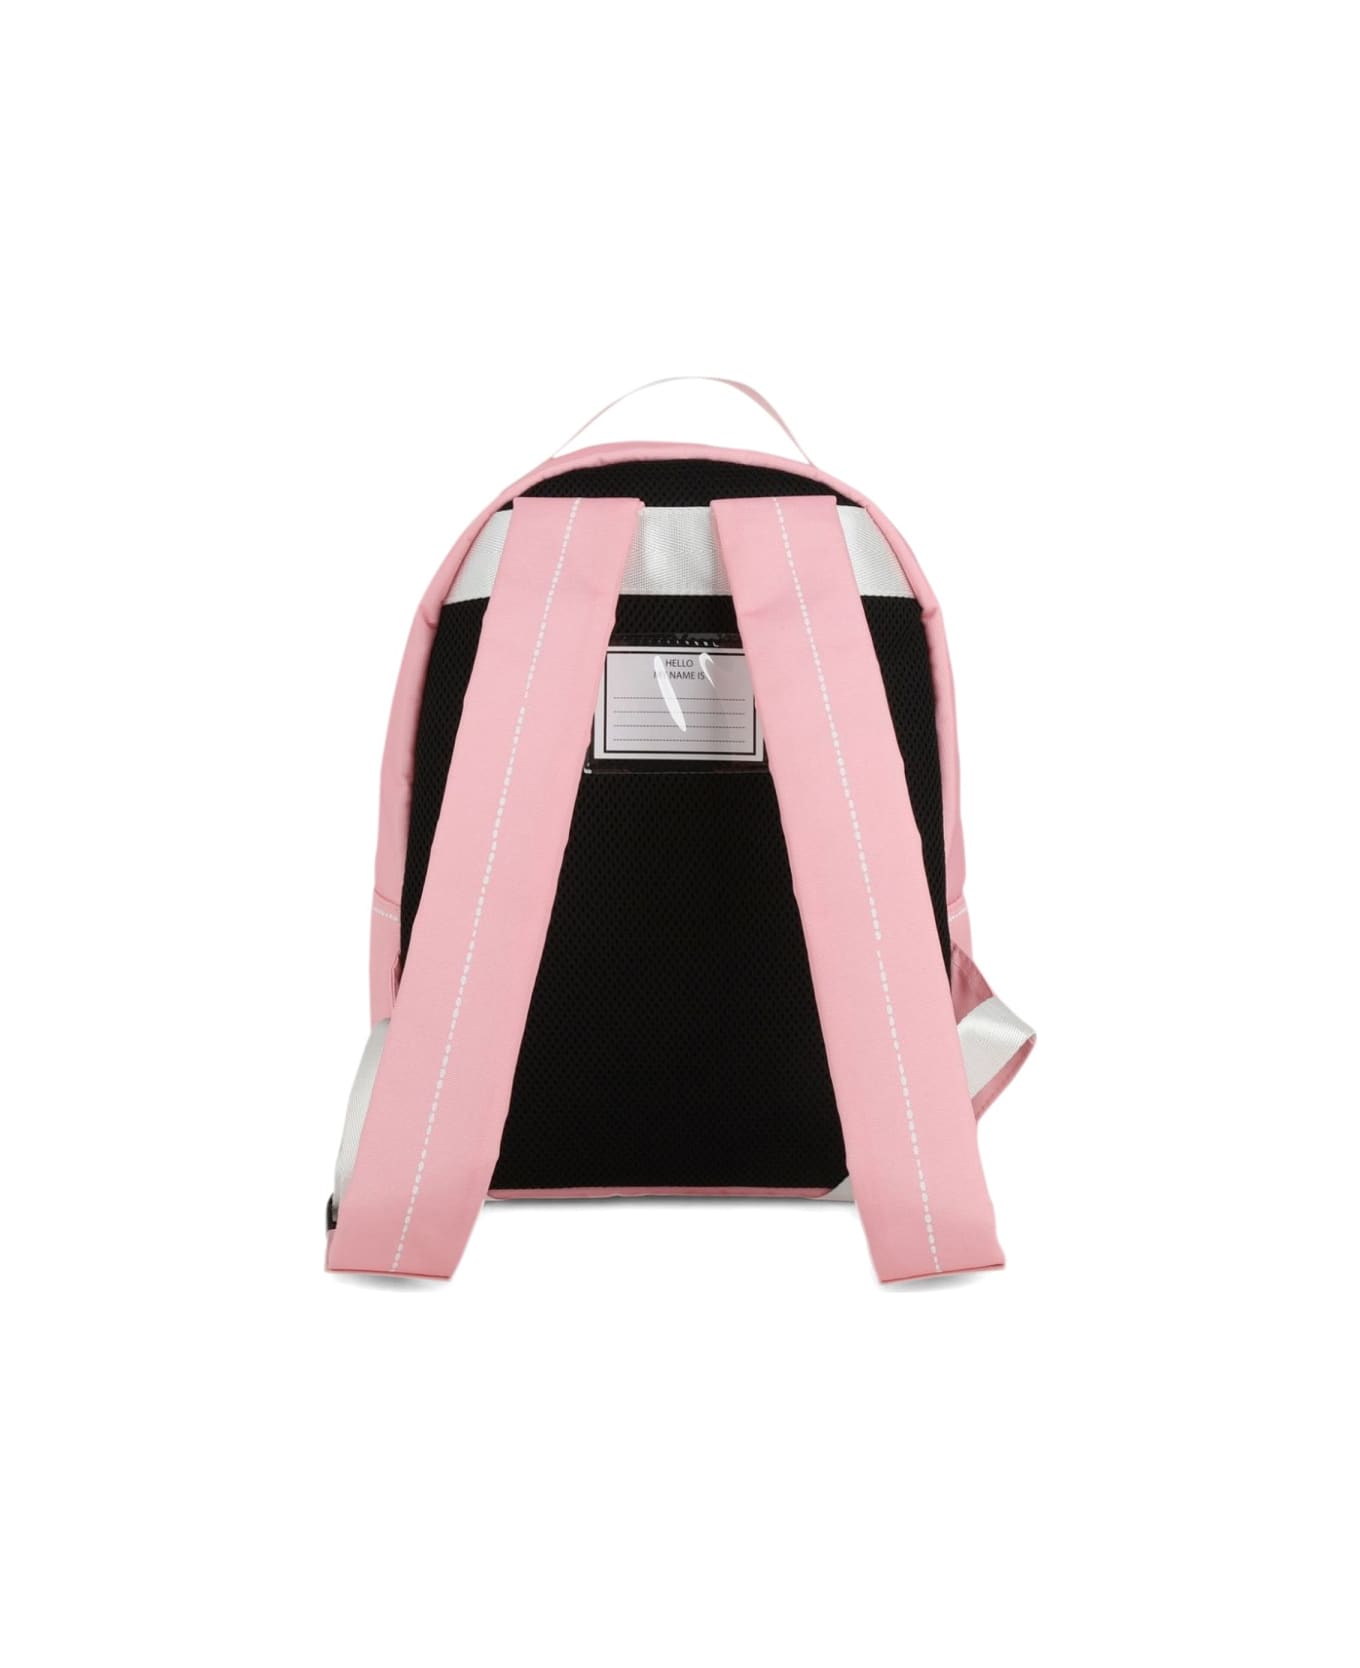 Marc Jacobs Backpack - PINK